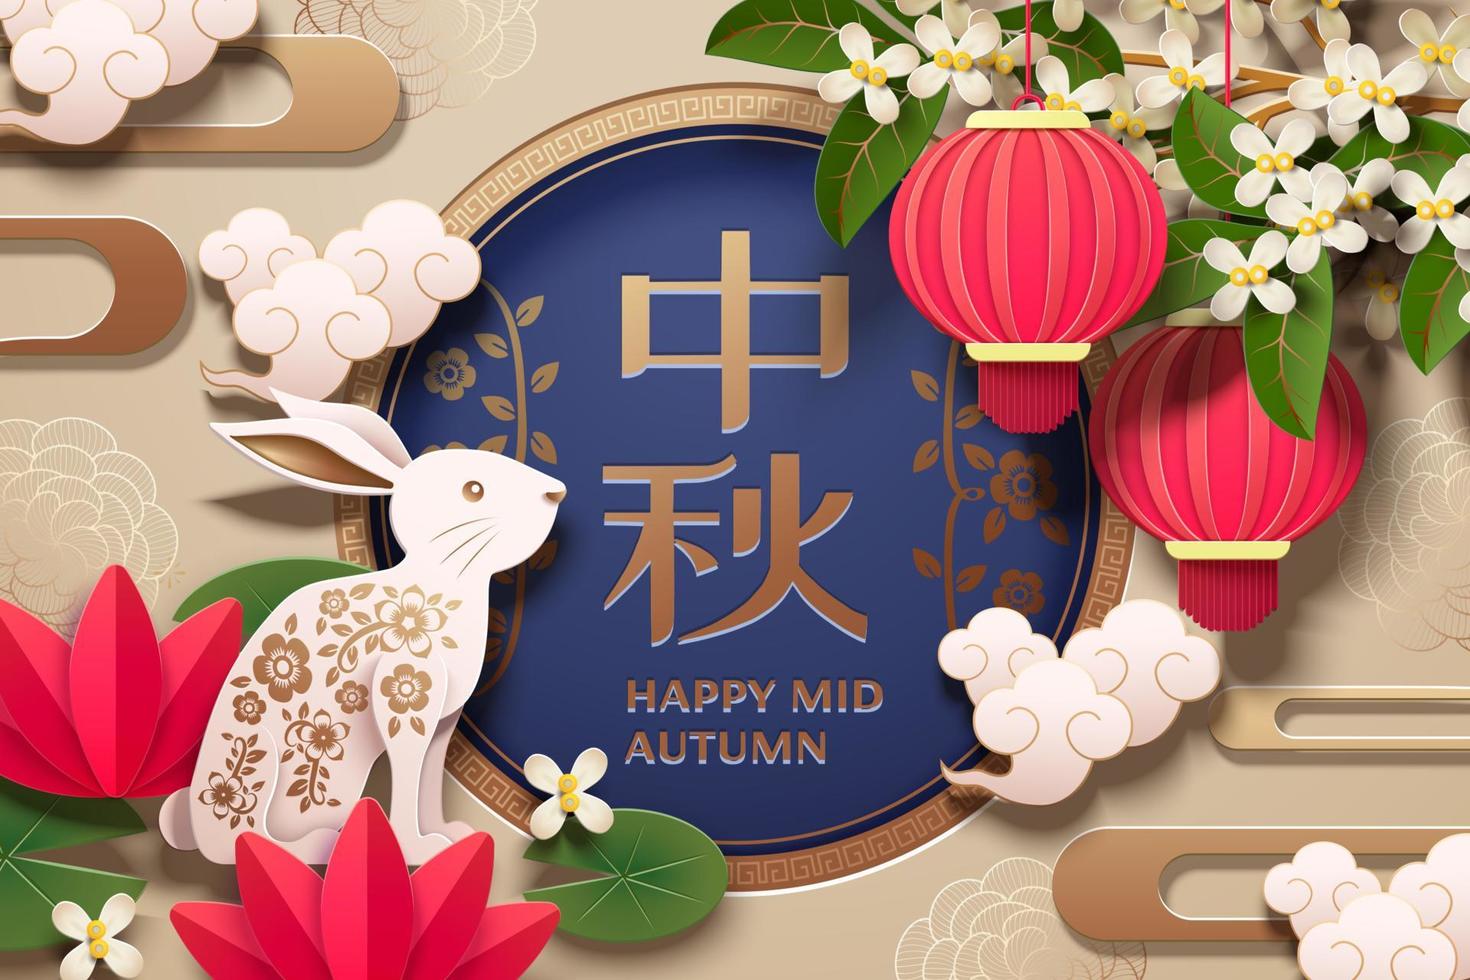 Happy mid autumn festival design with white rabbit and lanterns elements on beige background, Holiday name written in Chinese words vector